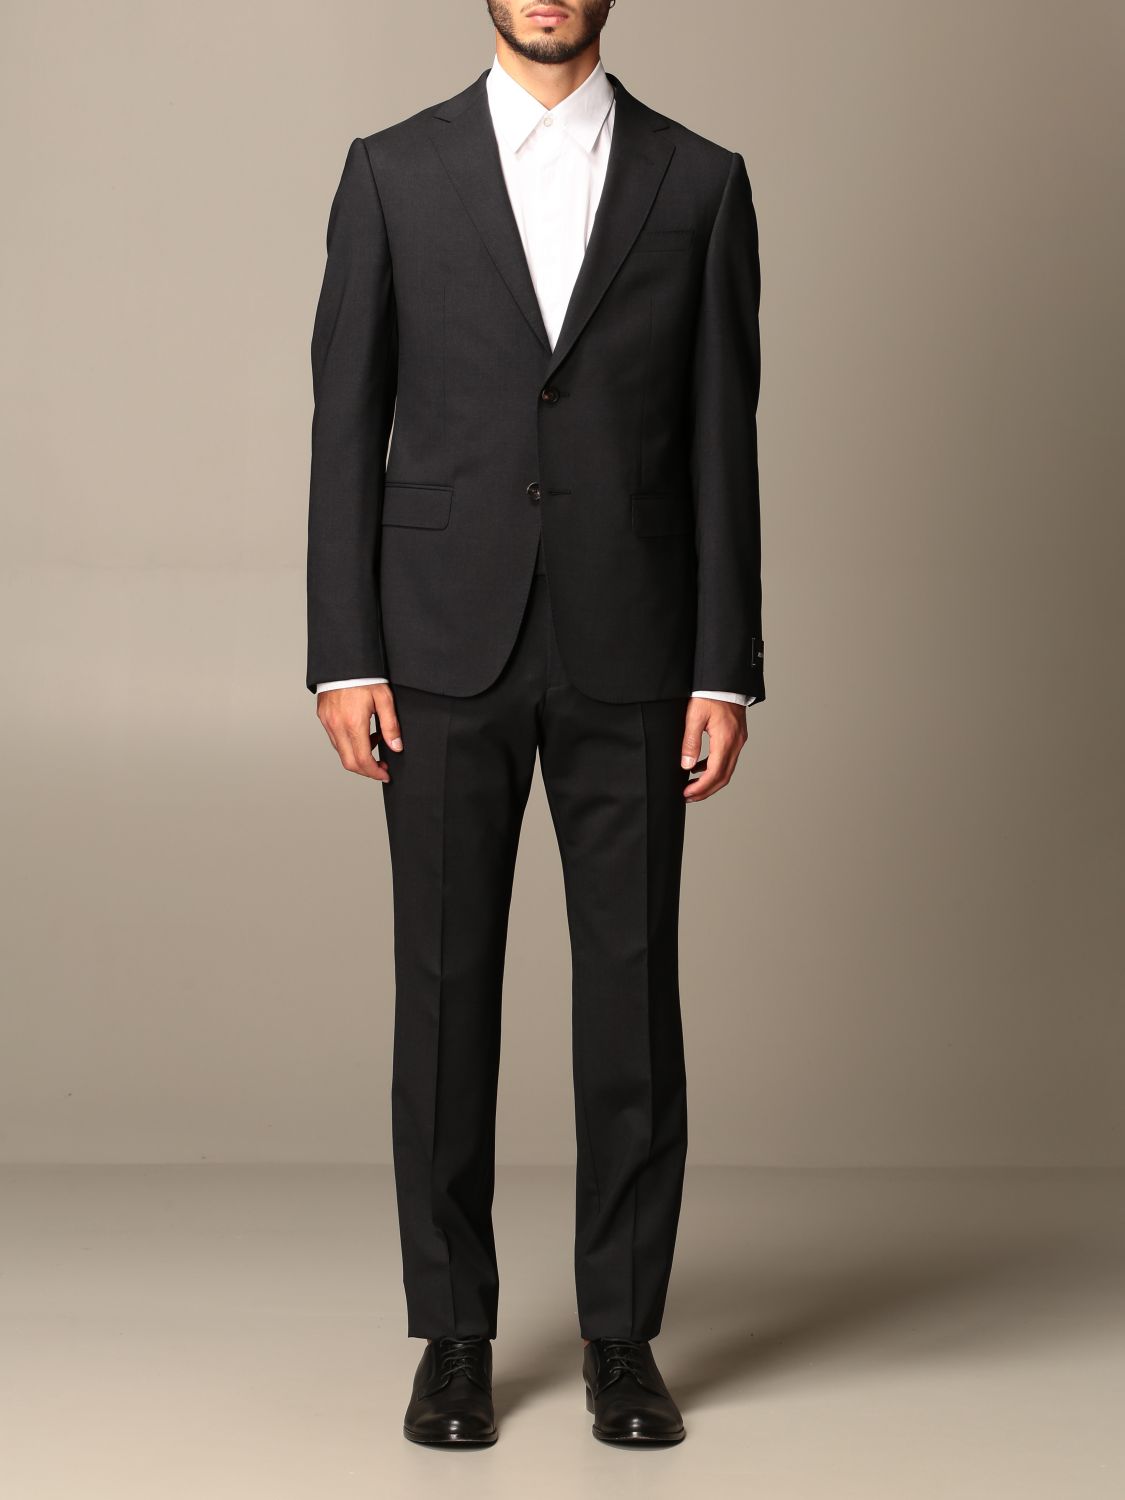 Z Zegna Outlet: single-breasted suit in 290 gr wool drop 8 - Charcoal ...